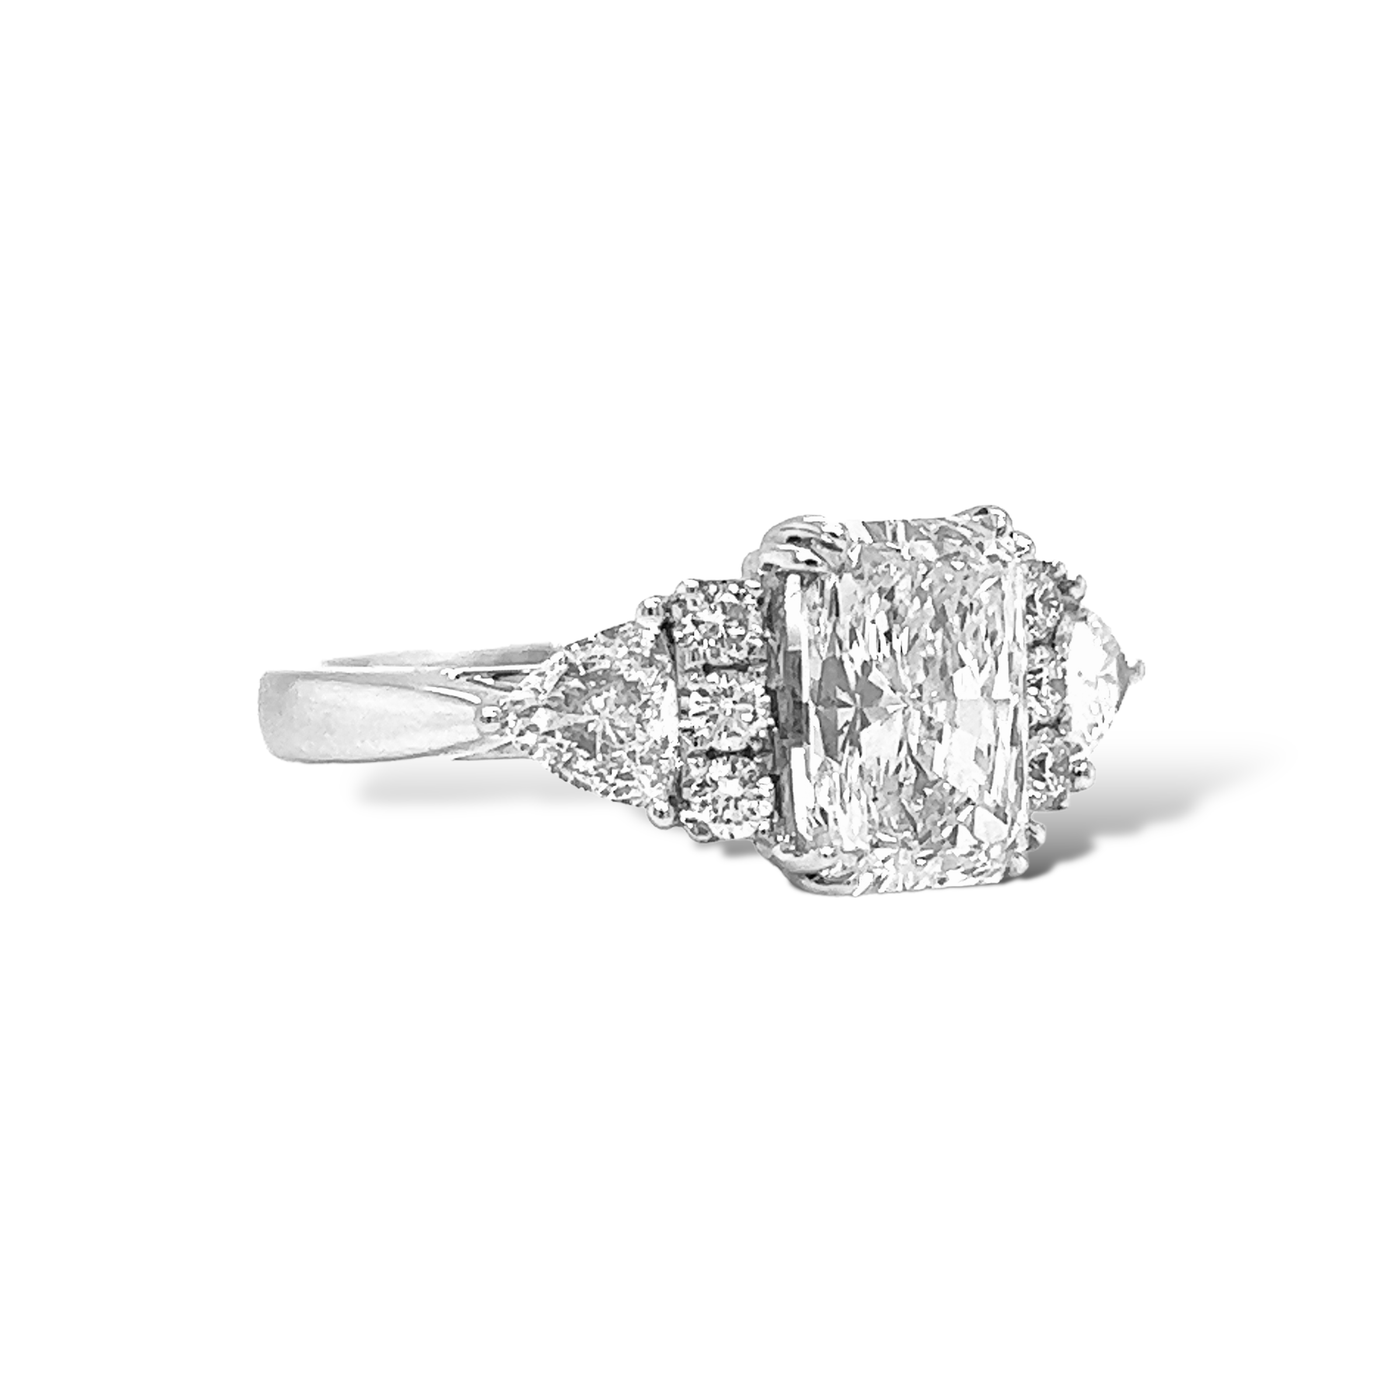 RADIANT CUT DIAMOND WITH ROUND AND TRIANGLE CUT DIAMONDS ON THE SIDES LG